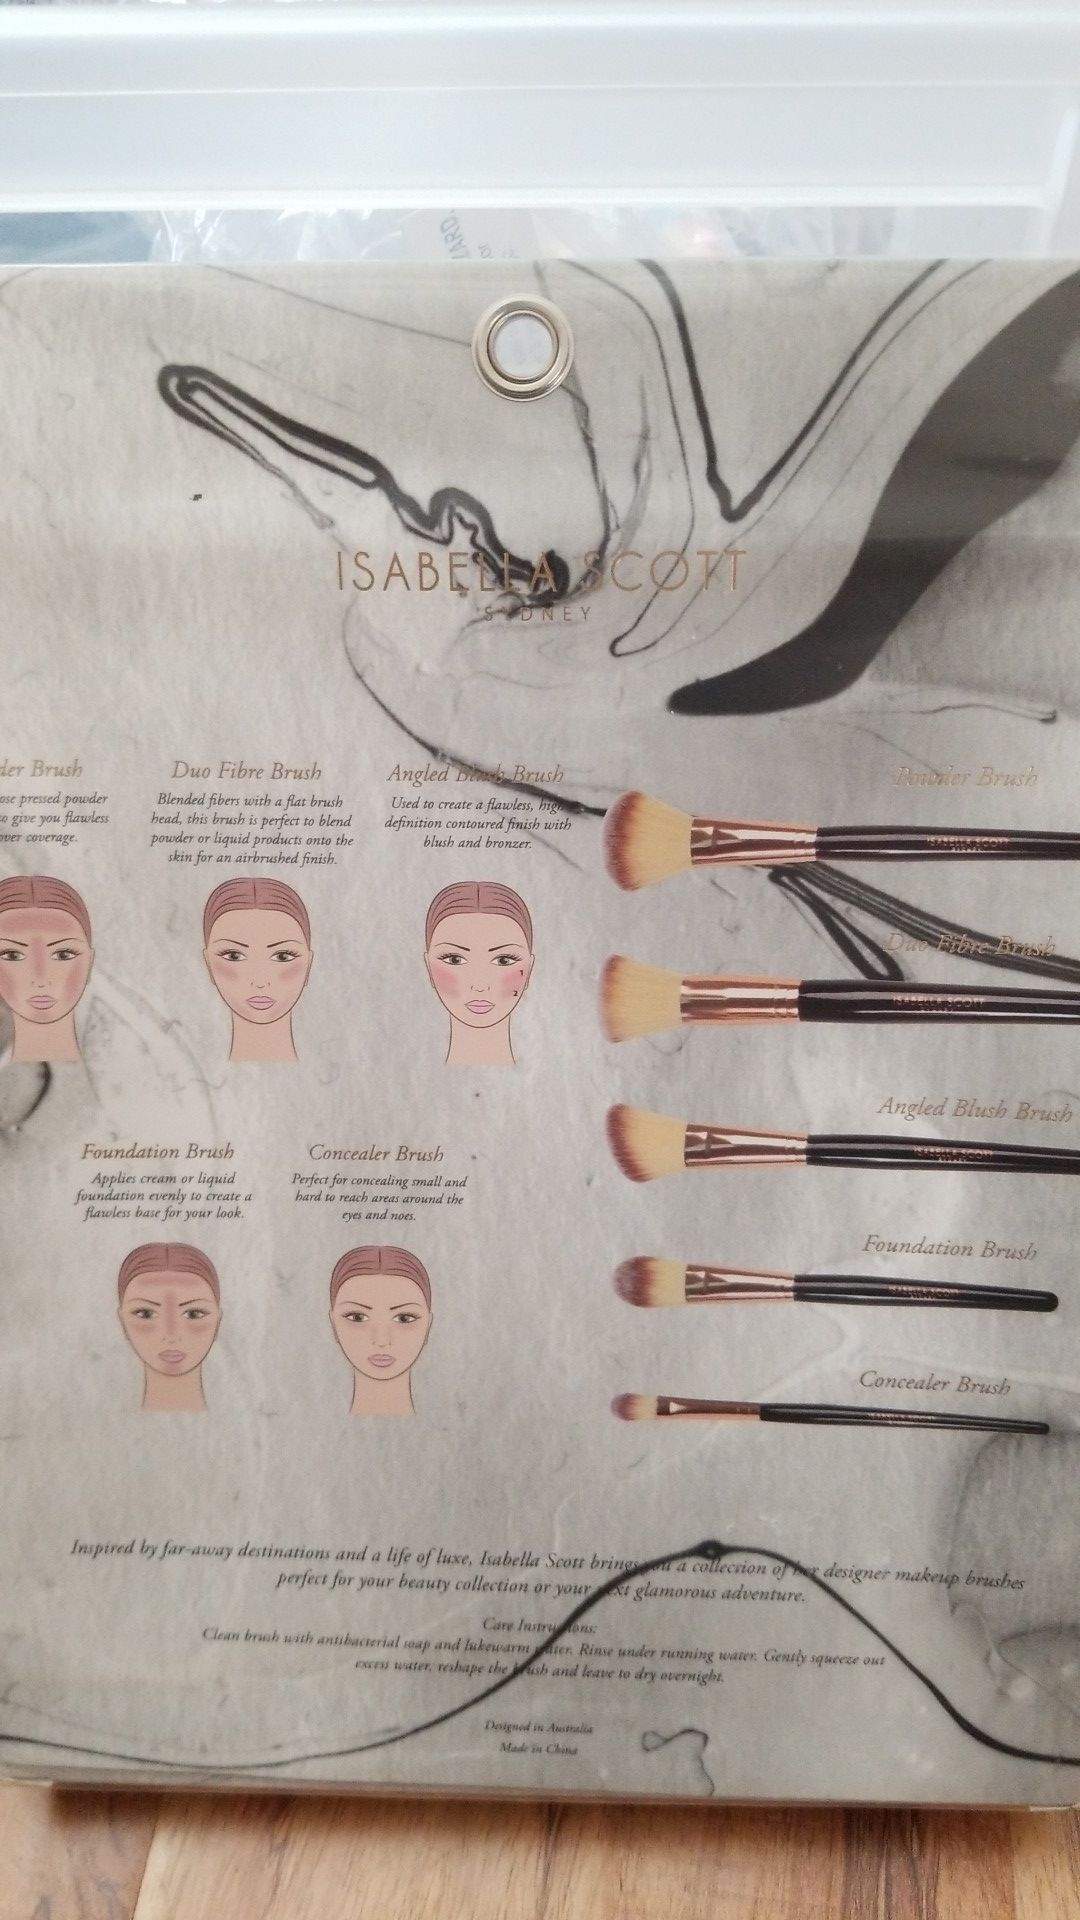 Make Up Brushes for Sale in Laredo, TX - OfferUp